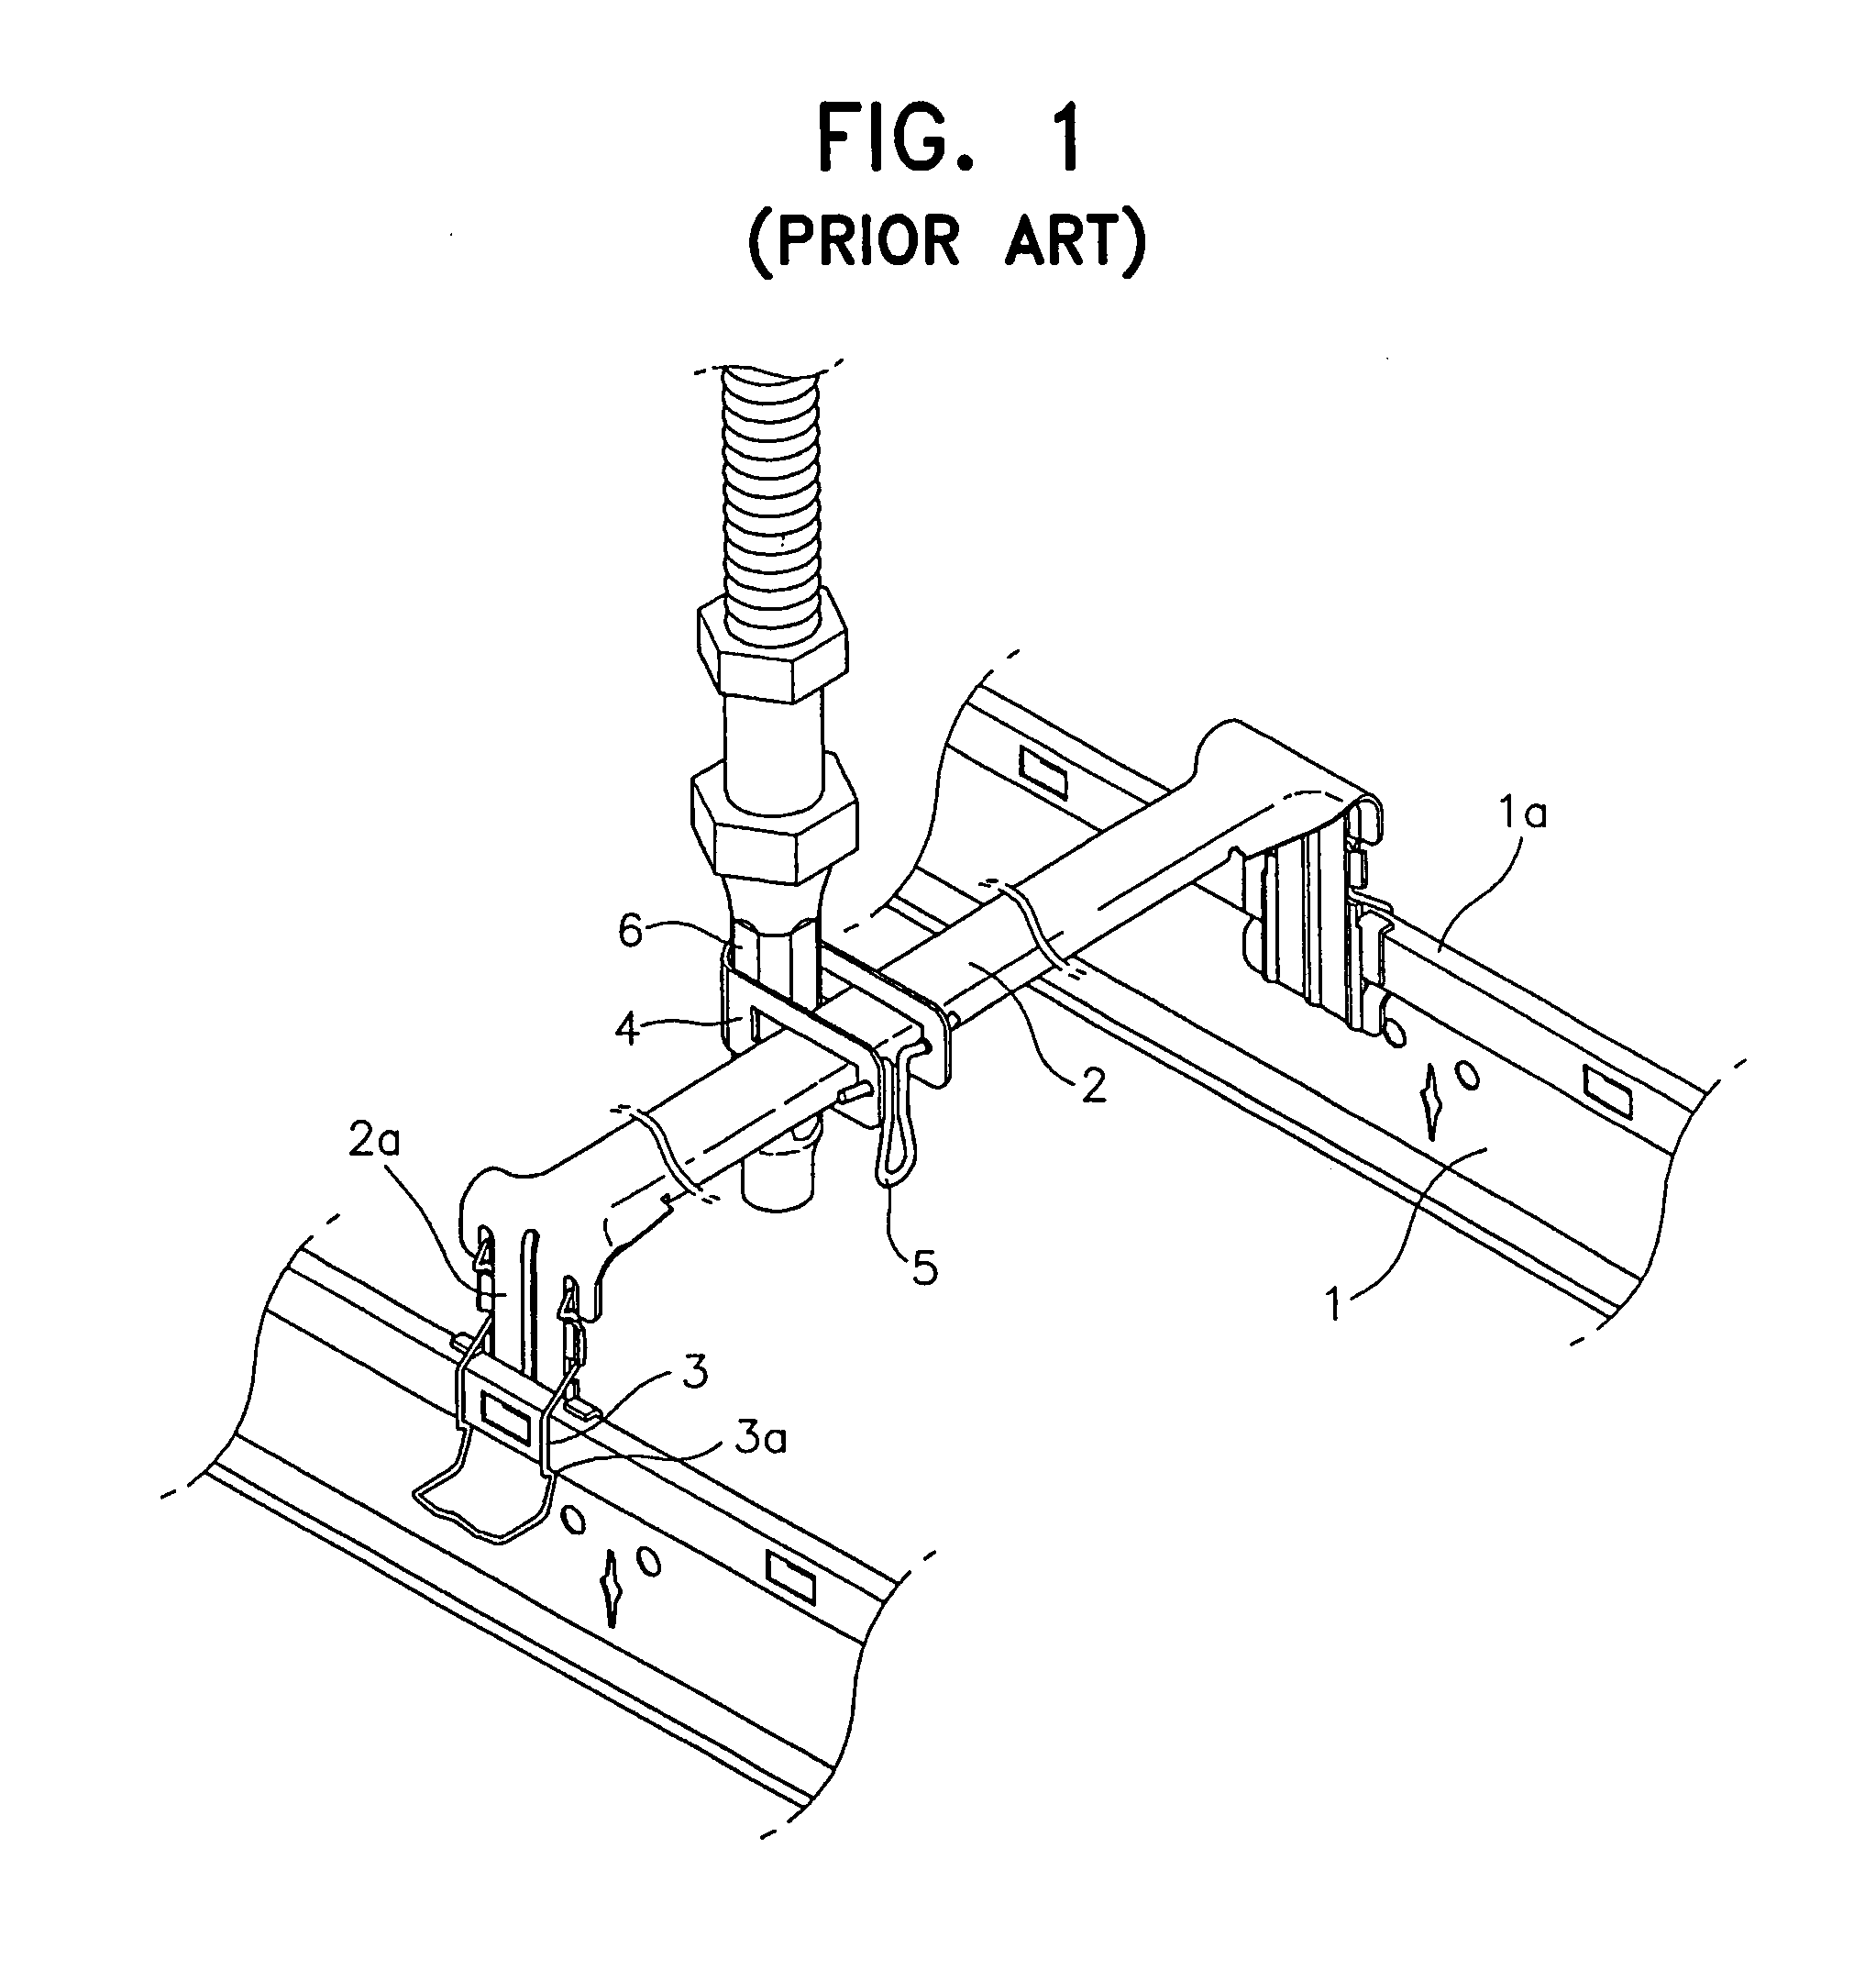 Stock bar and T-bar coupling structure for mounting sprinkler